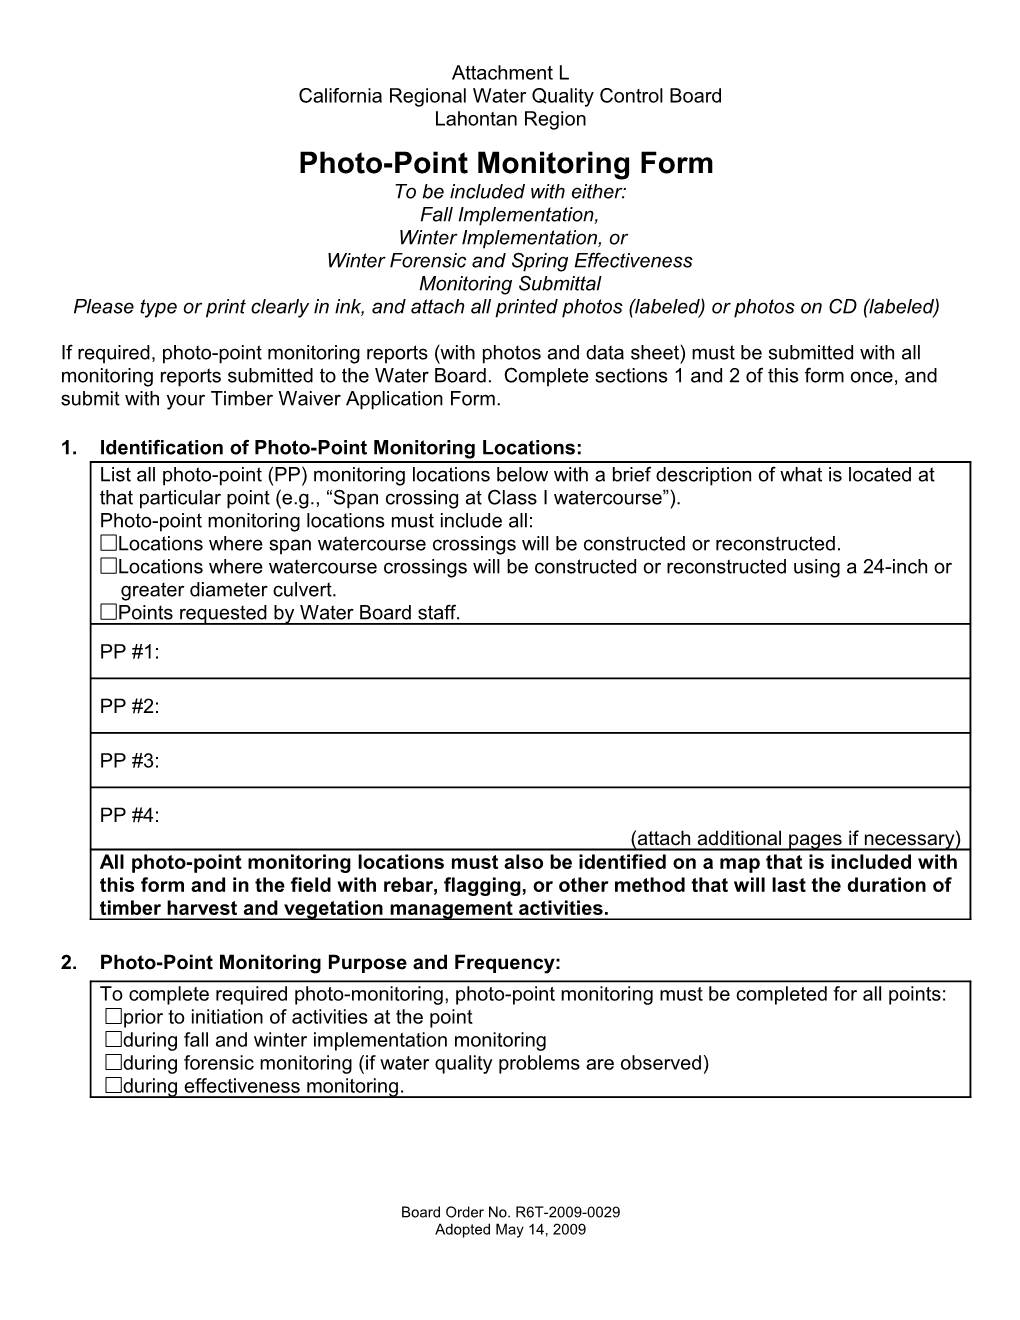 Timber Waiver Photo-Point Monitoring Form (Additional Pages) Page __ of __